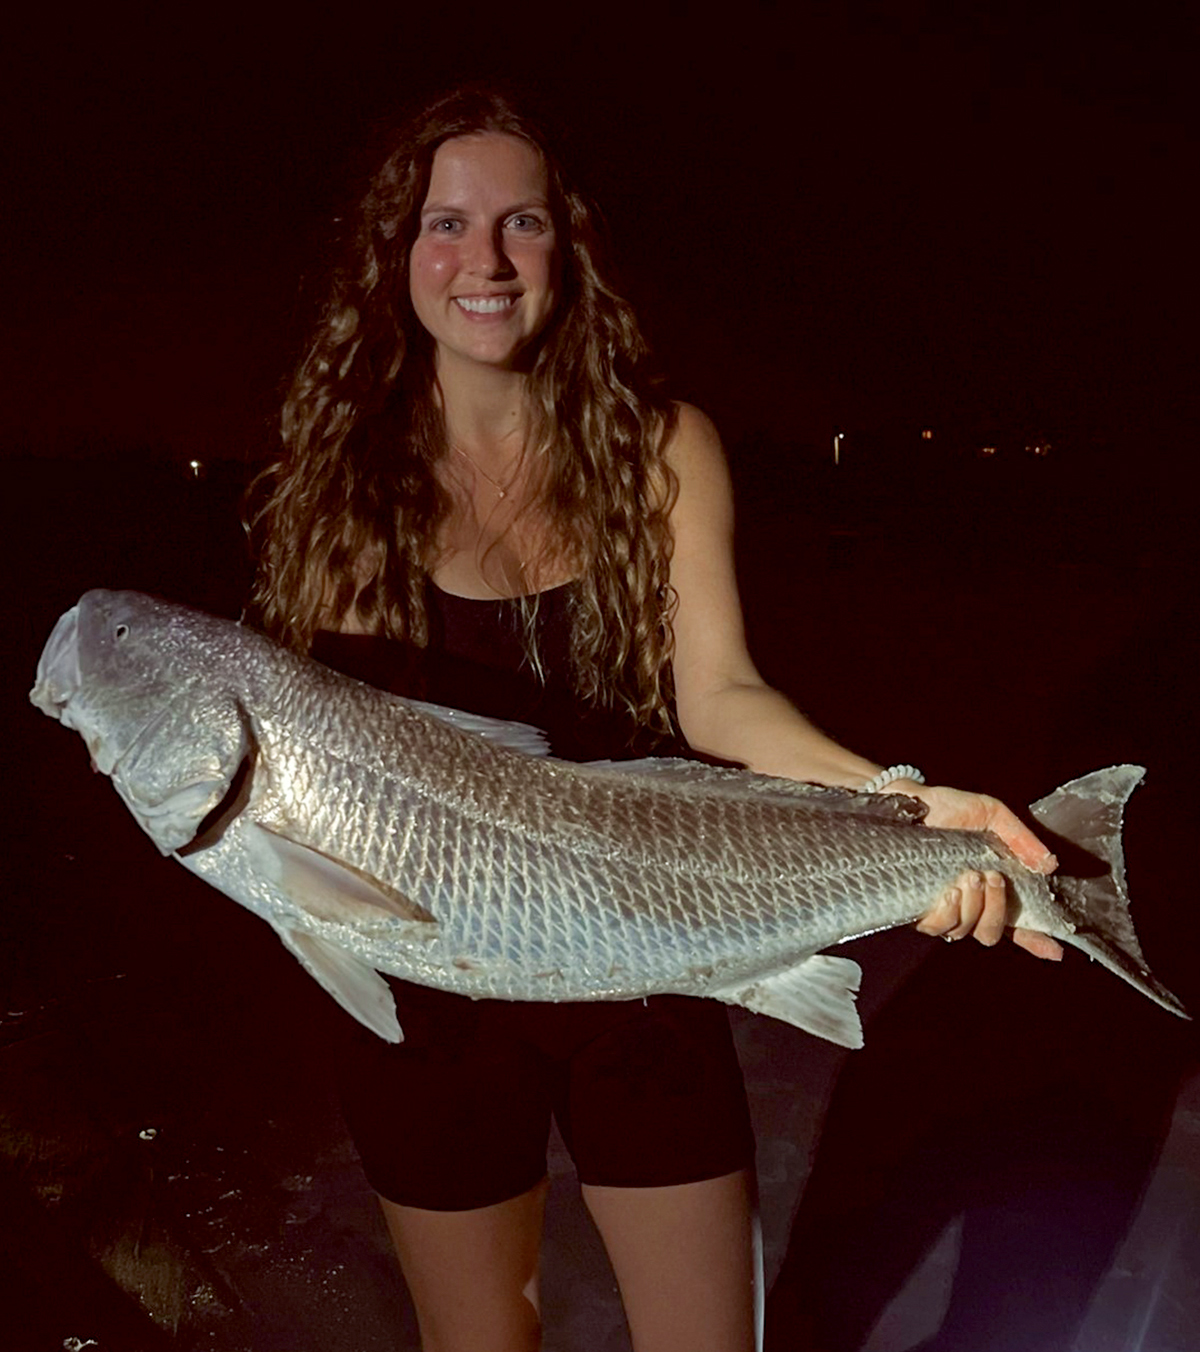 Rachel Hermann of Wilmington caught her tagged red drum while fishing at Wrightsville Beach and was selected to receive an additional $100 in the yearly drawing. Photo: Division of Marine Fisheries